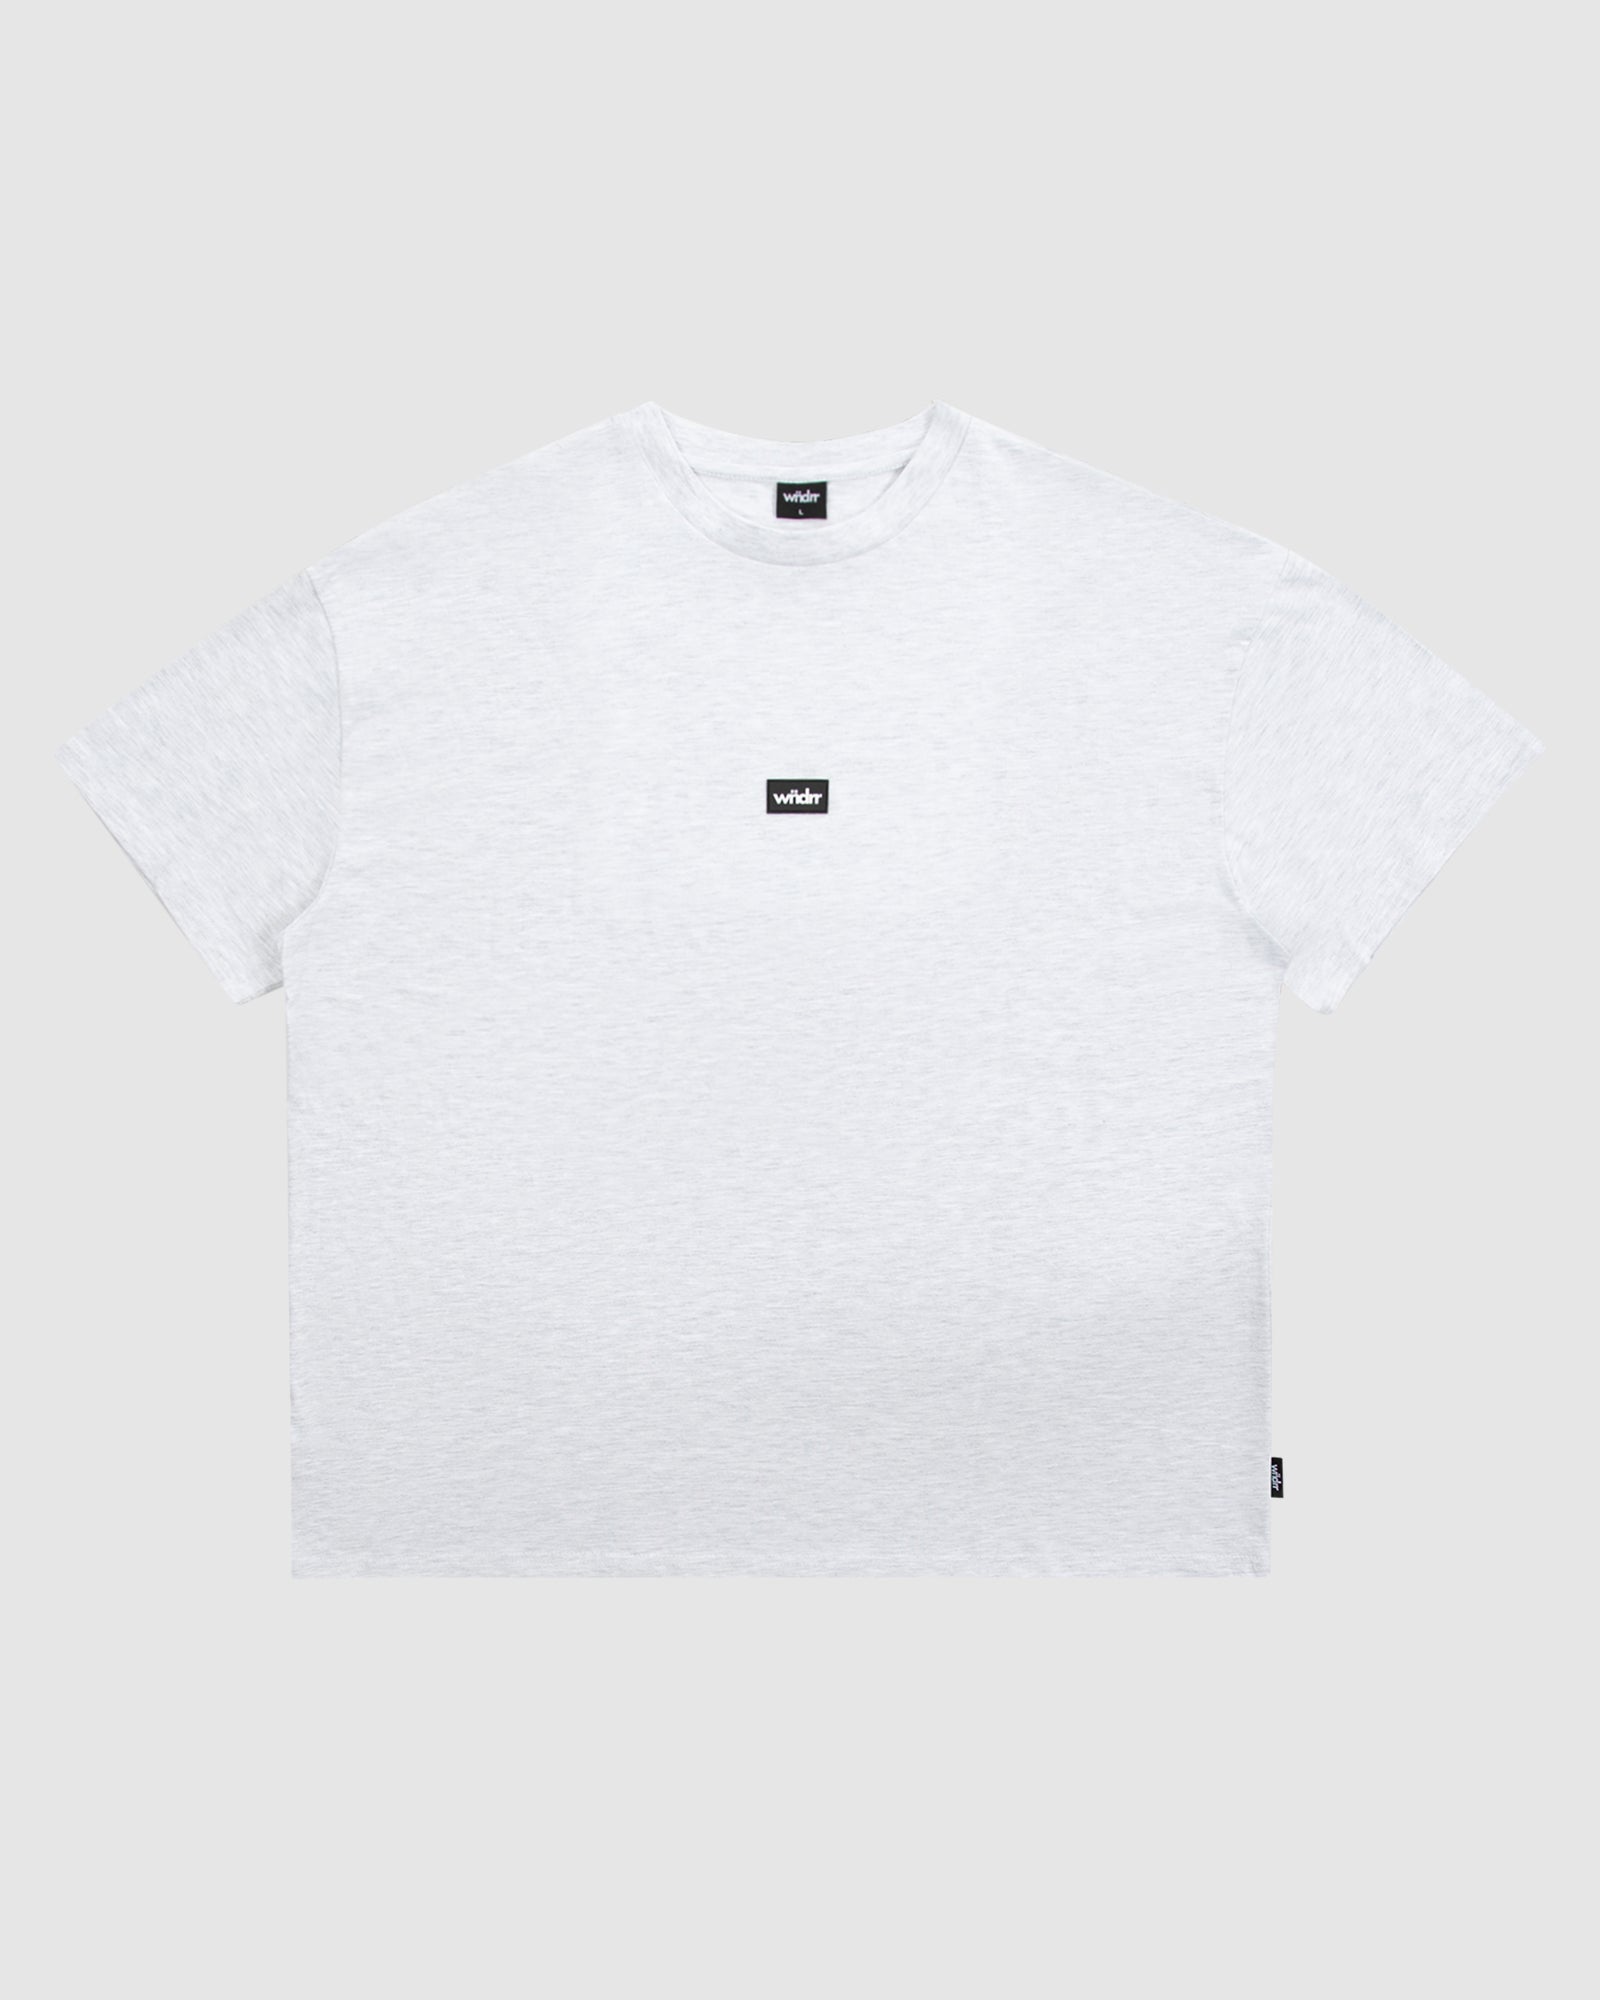 HOXTON VINTAGE FIT TEE - WHITE MARLE